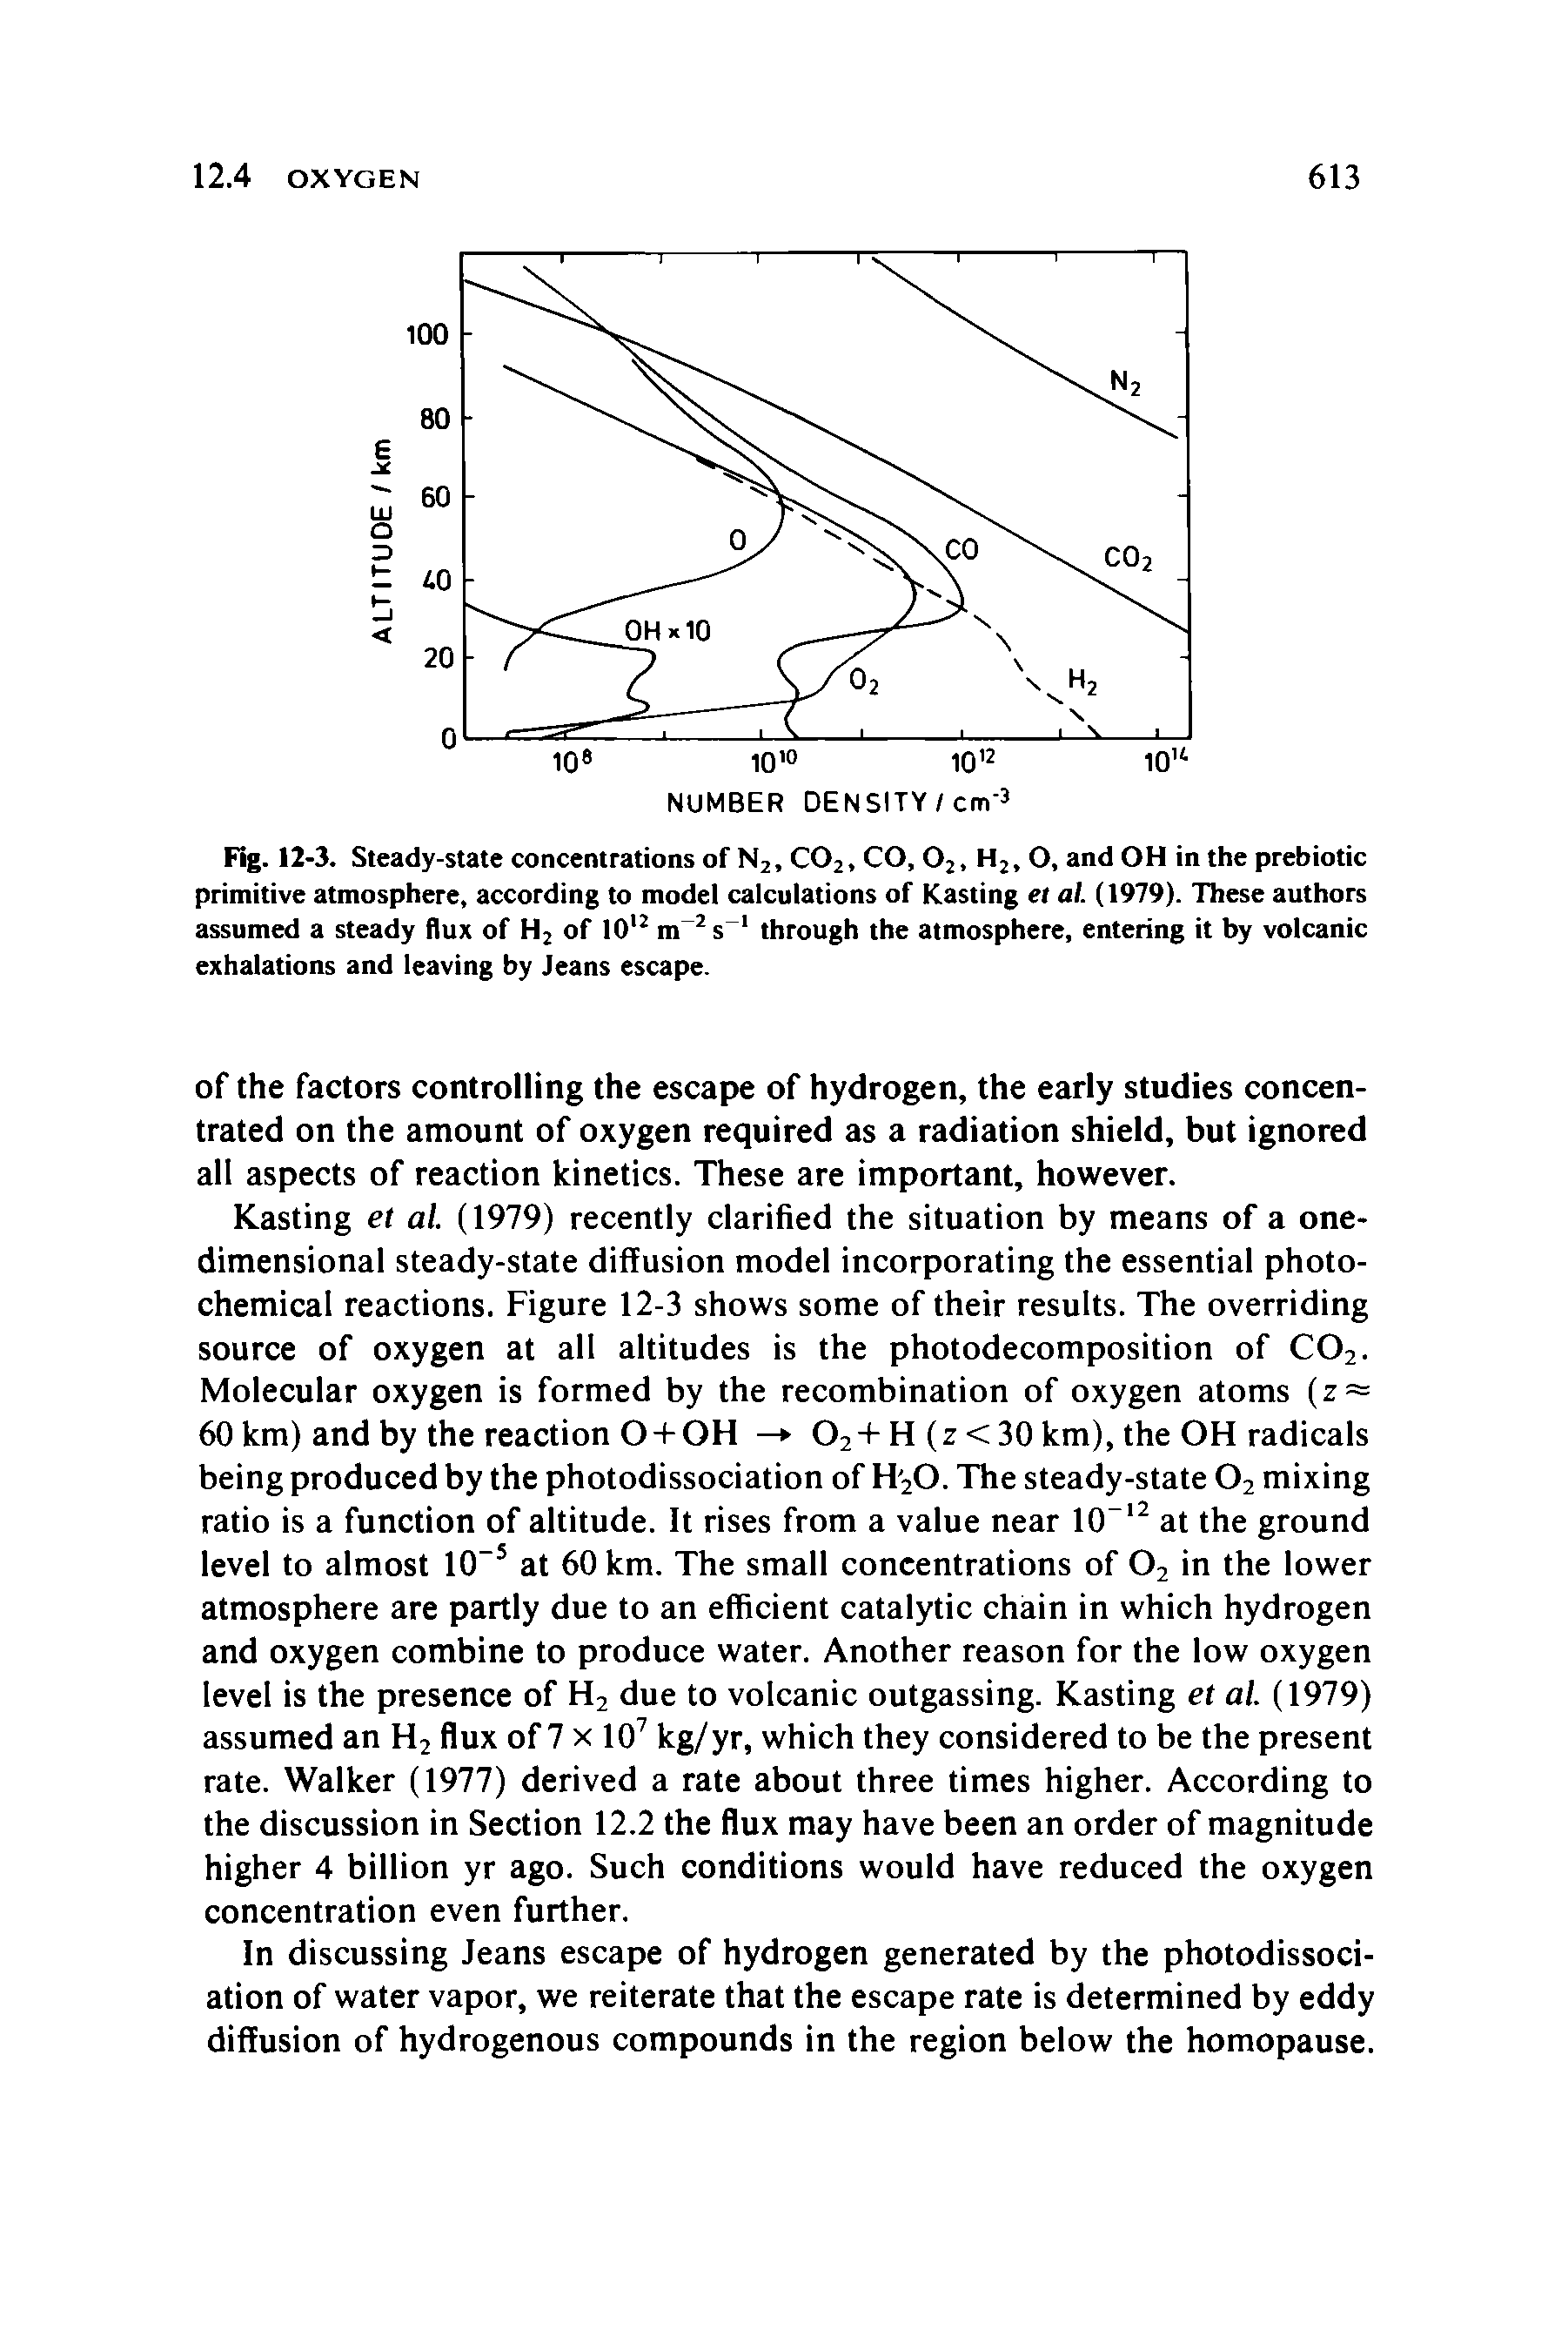 Fig. 12-3. Steady-state concentrations of N2, C02, CO, 02, H2, O, and OH in the prebiotic primitive atmosphere, according to model calculations of (Casting et al. (1979). These authors assumed a steady flux of H2 of 1012 m 2s 1 through the atmosphere, entering it by volcanic exhalations and leaving by Jeans escape.